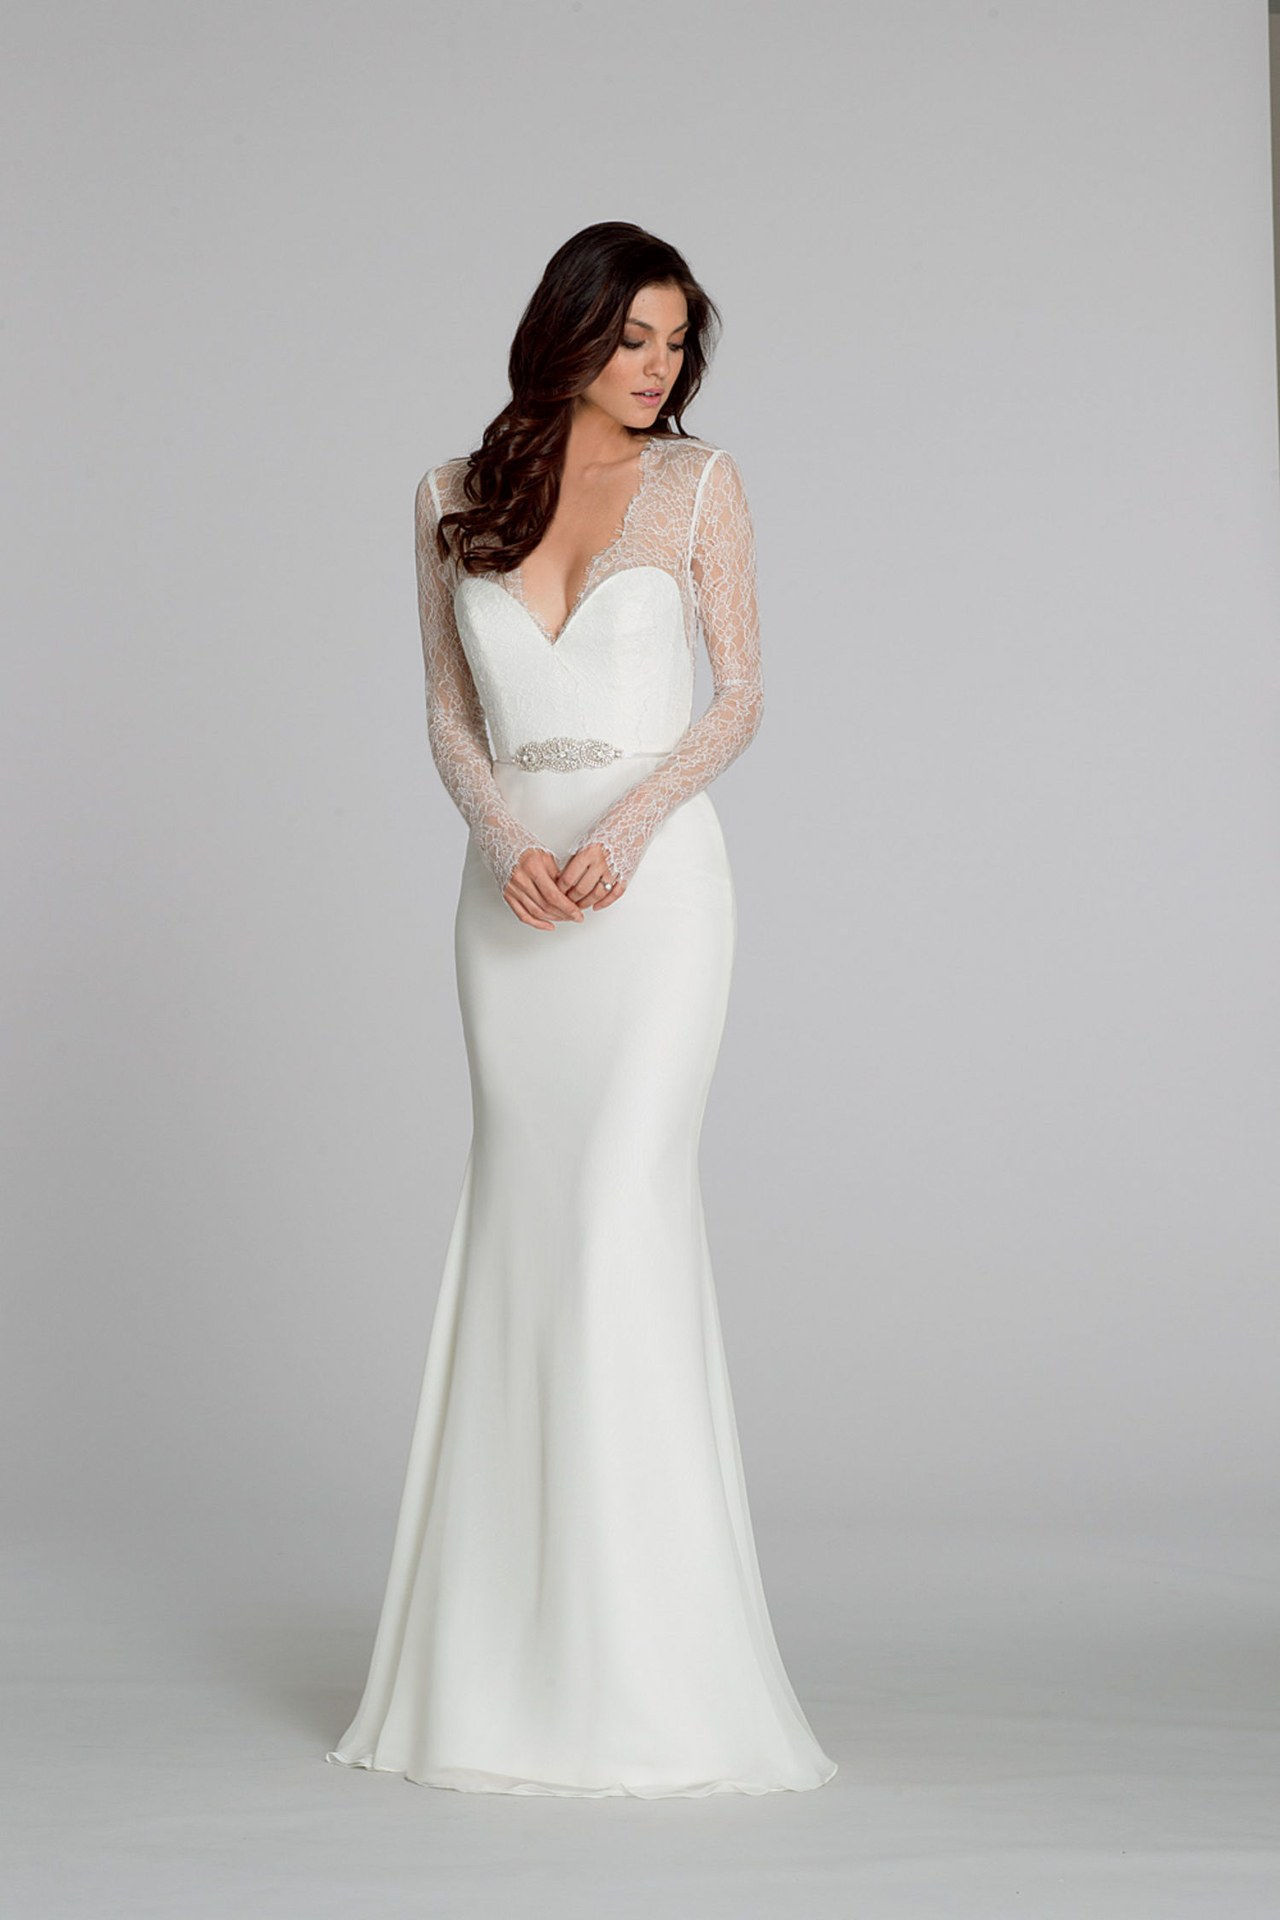 27 wedding dresses with sleeves 1001 courtesy